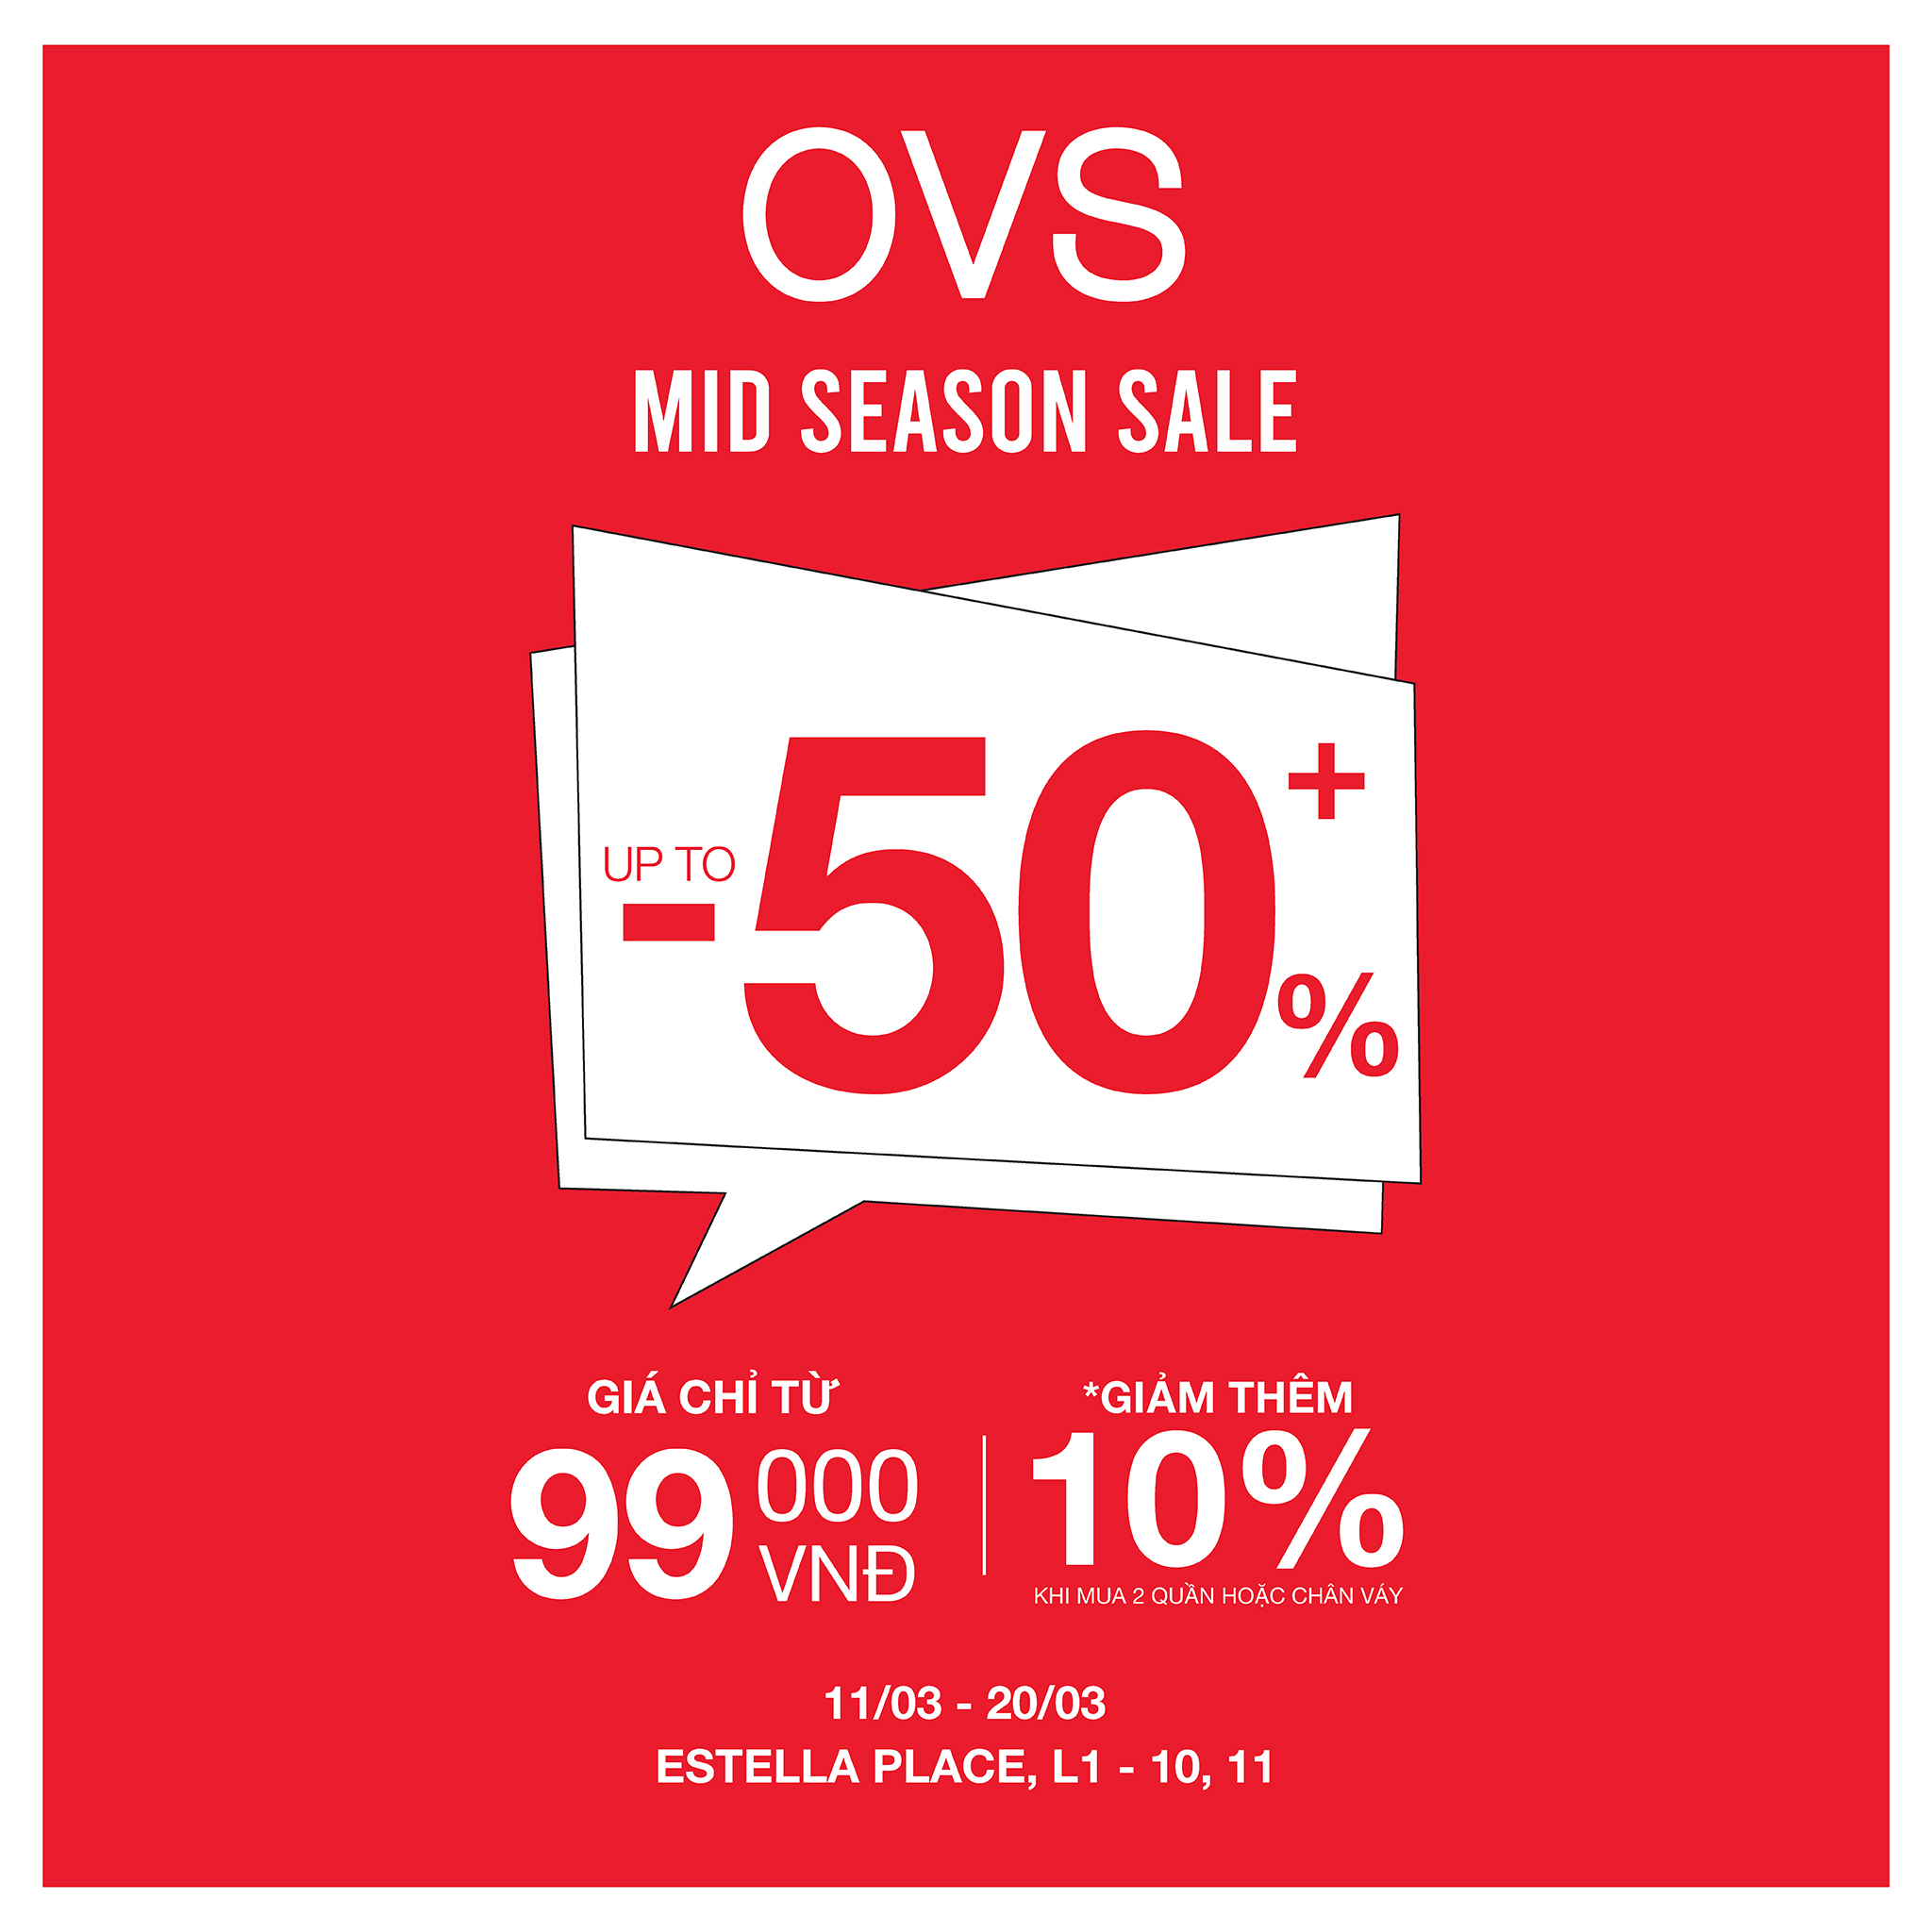 SHOP THE BEST MID-SEASON SALE NOW! ONLY FROM 99K